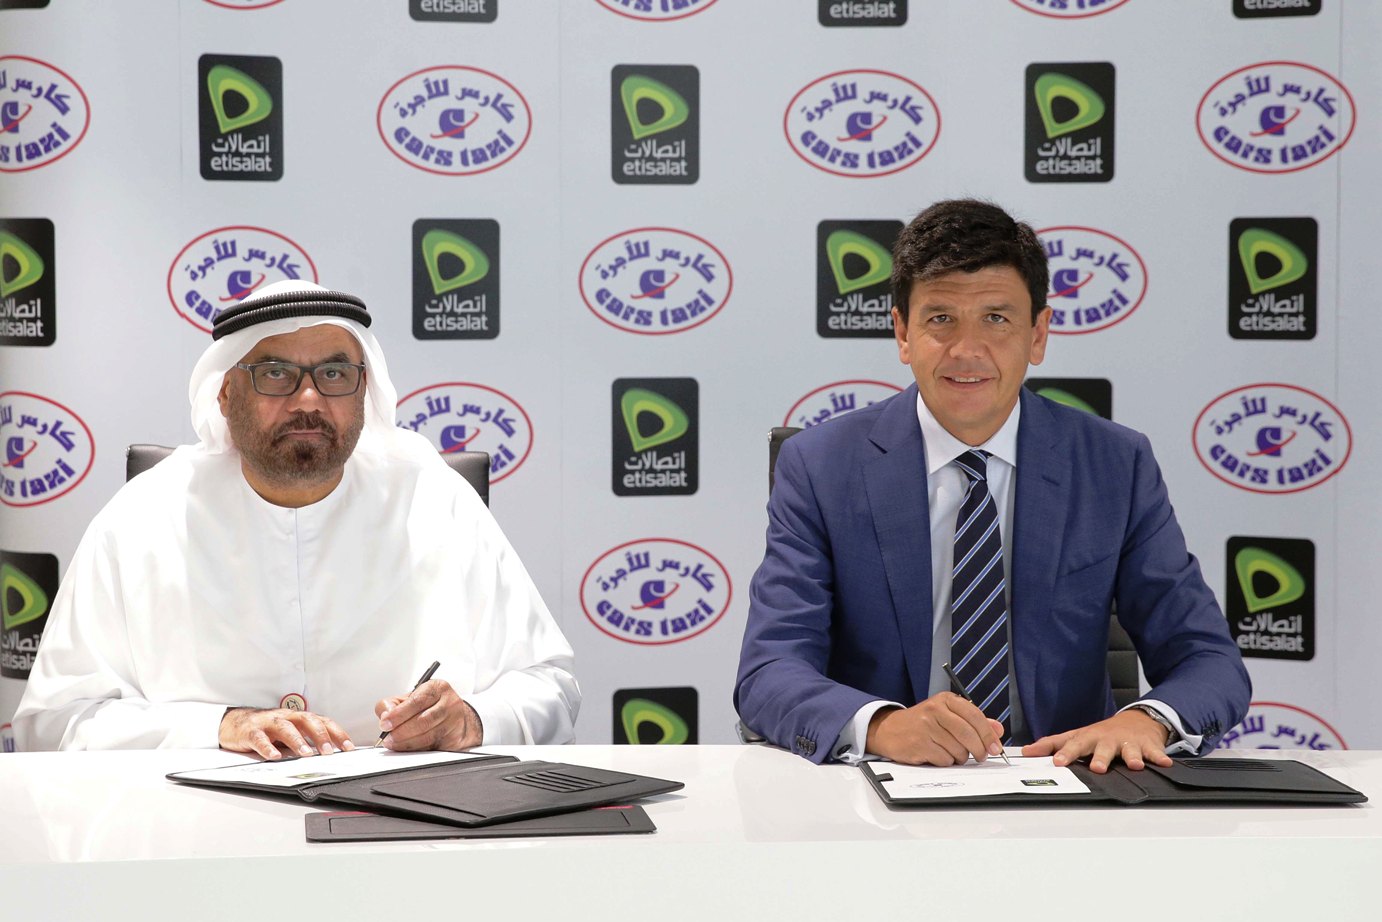 Etisalat Digital Partners with Cars Taxi to Implement Automotive Surveillance Solutions